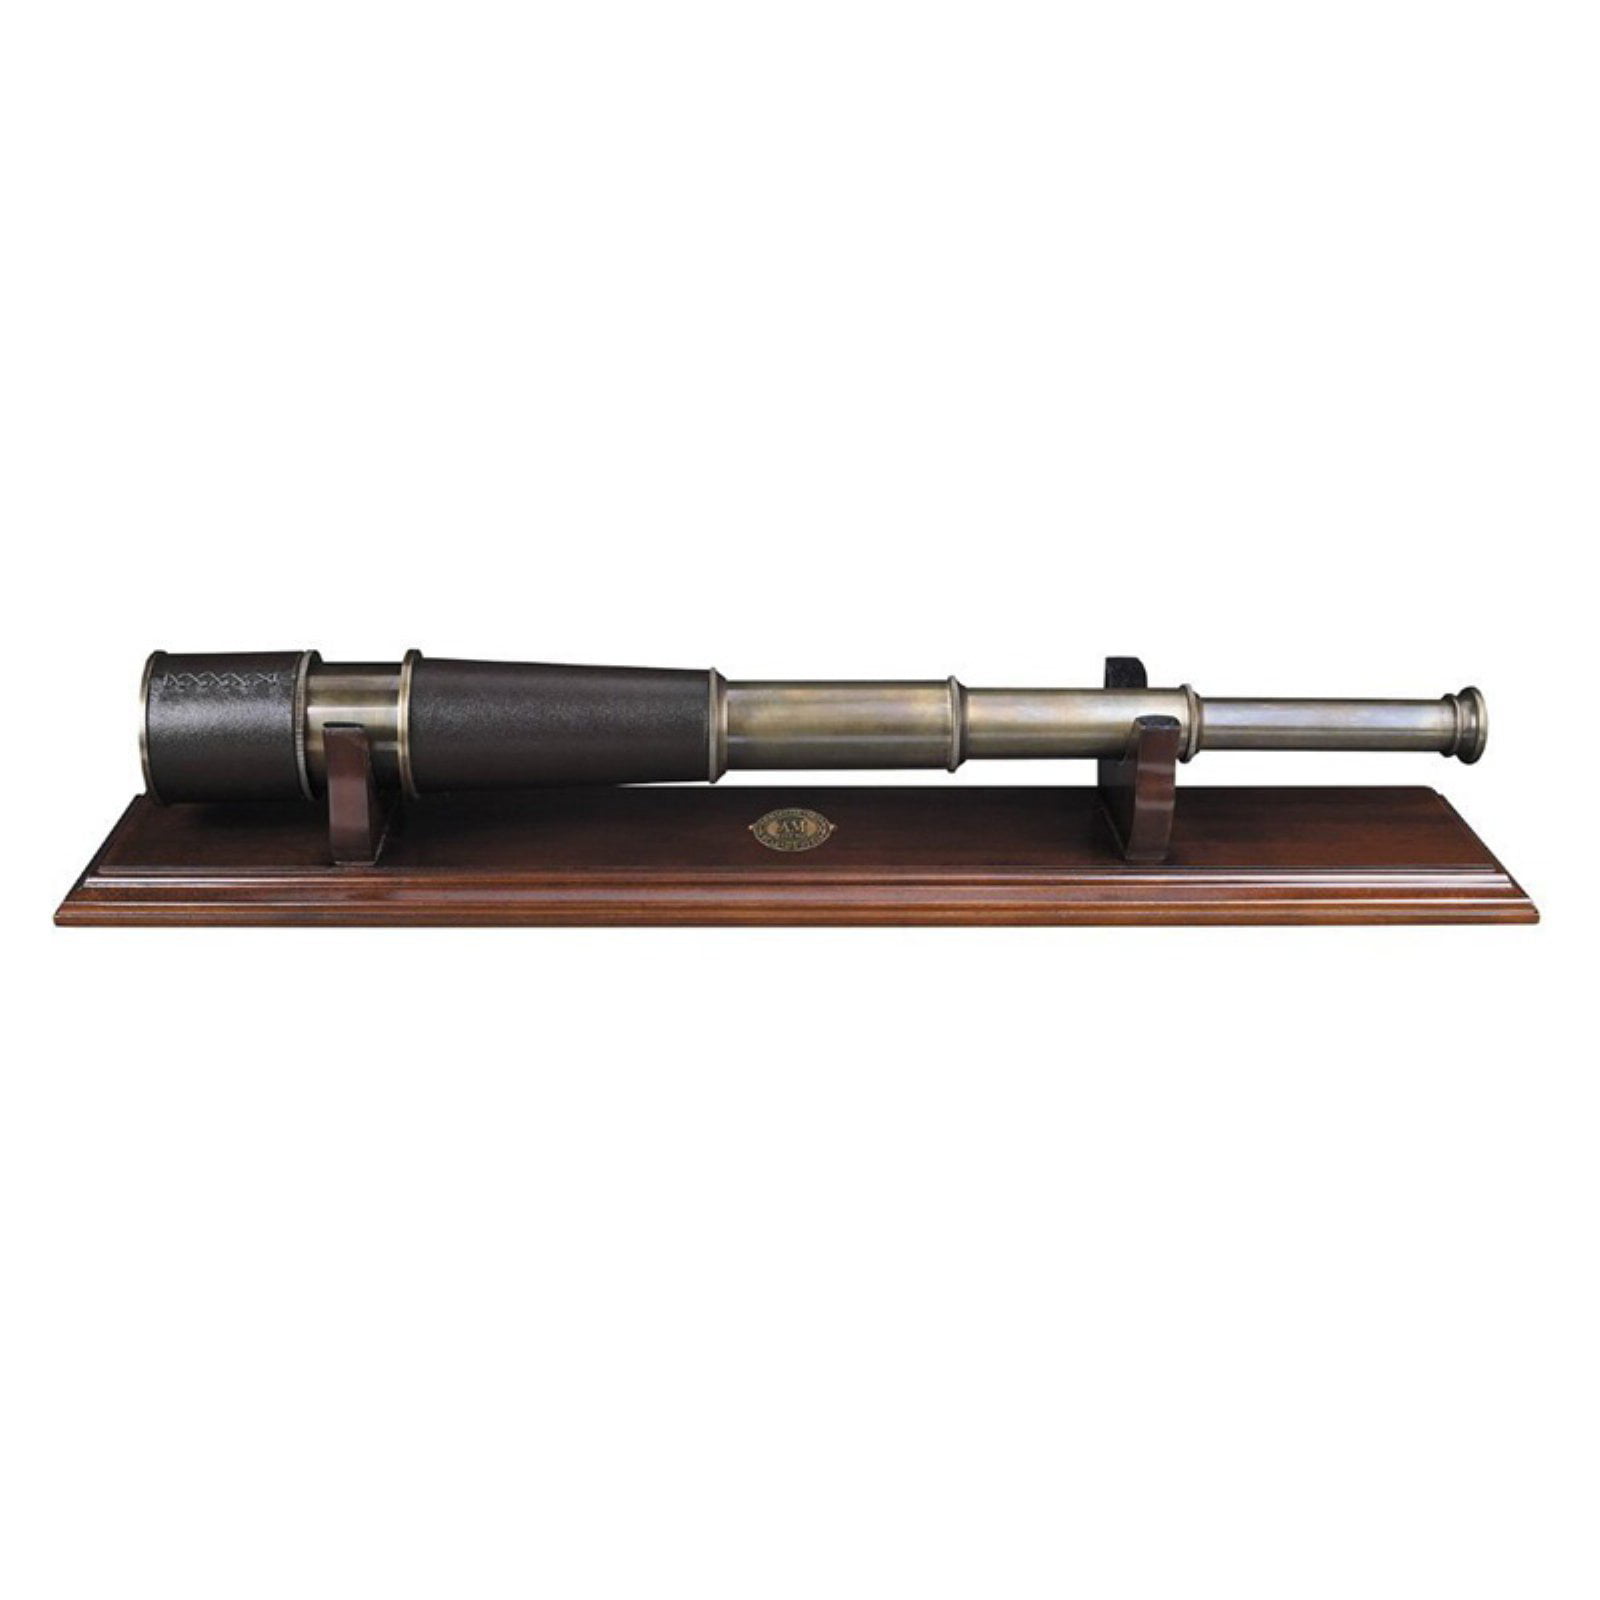 Authentic Models Bronze Spyglass And Stand